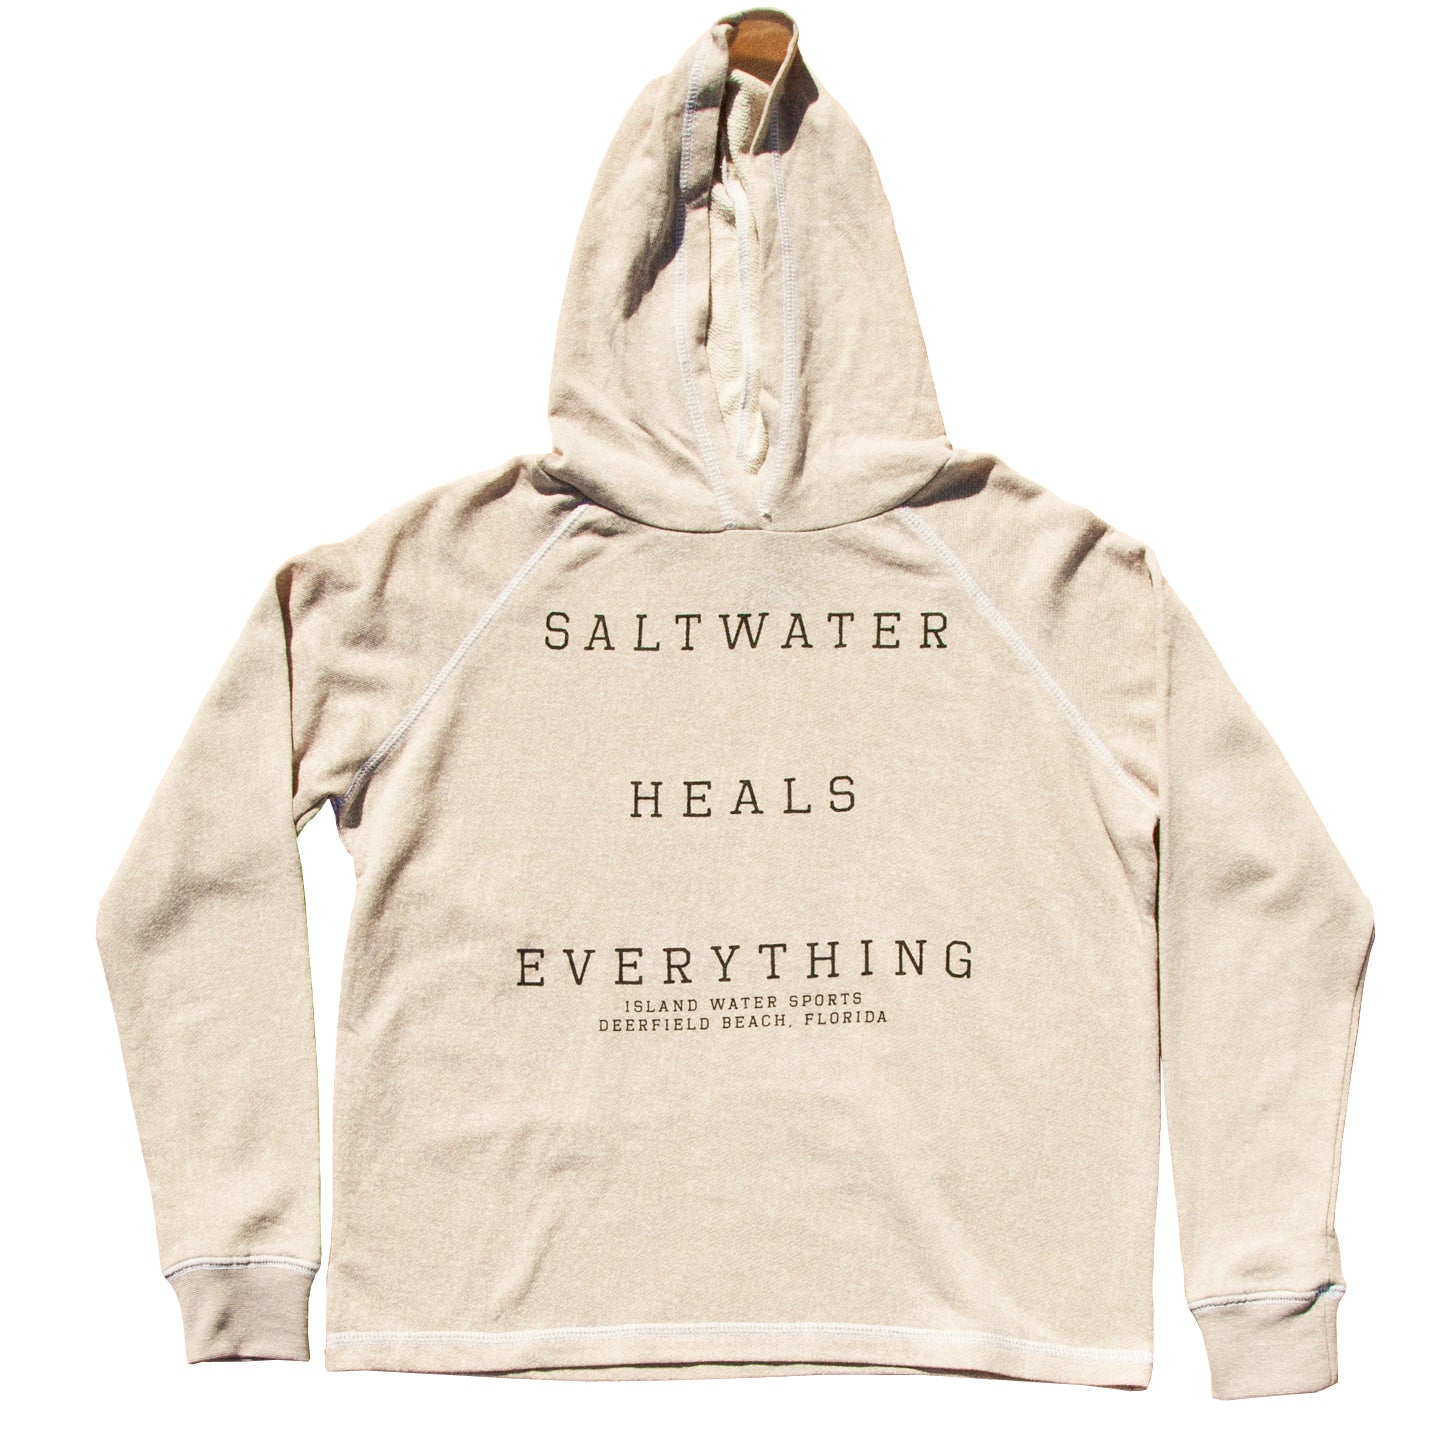 Island Water Sports Saltwater Heals Everything Terry Boxy Pullover Hoodie CC3007 LtGREY S